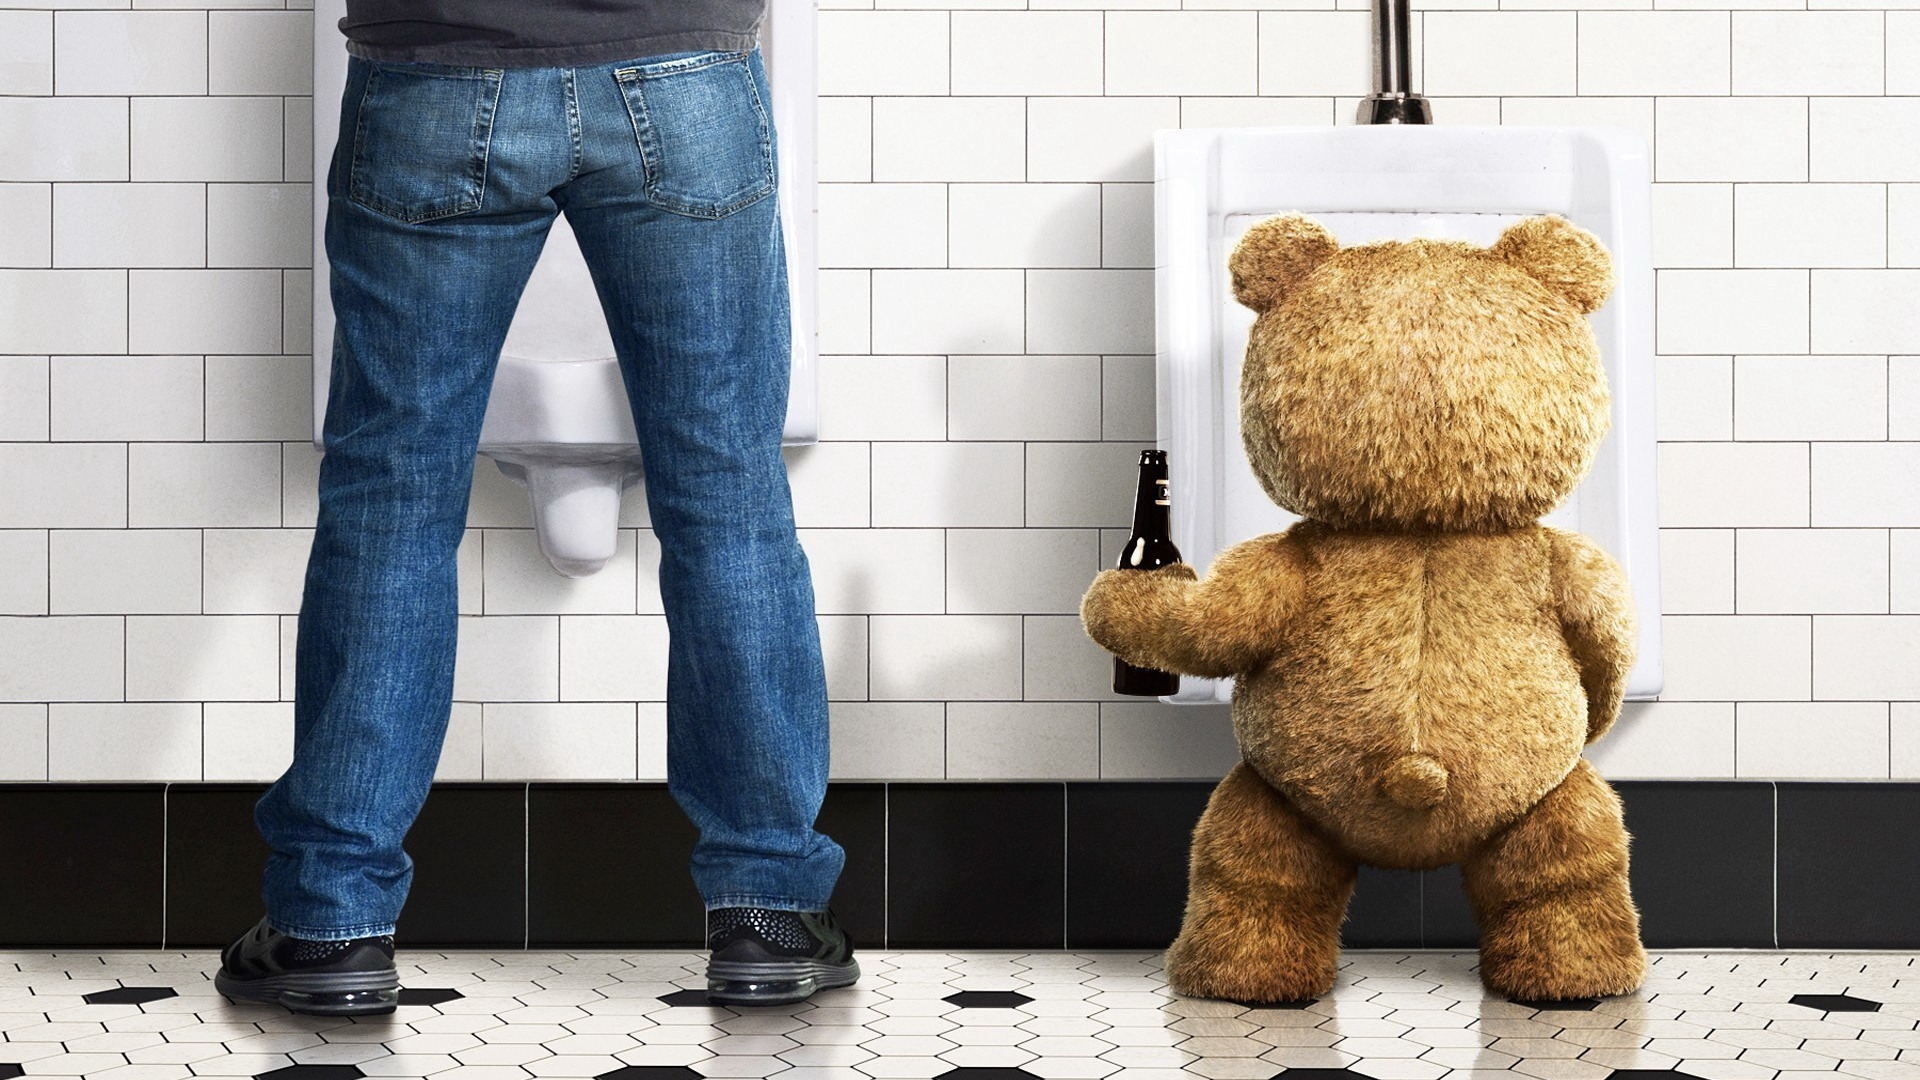 Ted Movie for 1920 x 1080 HDTV 1080p resolution